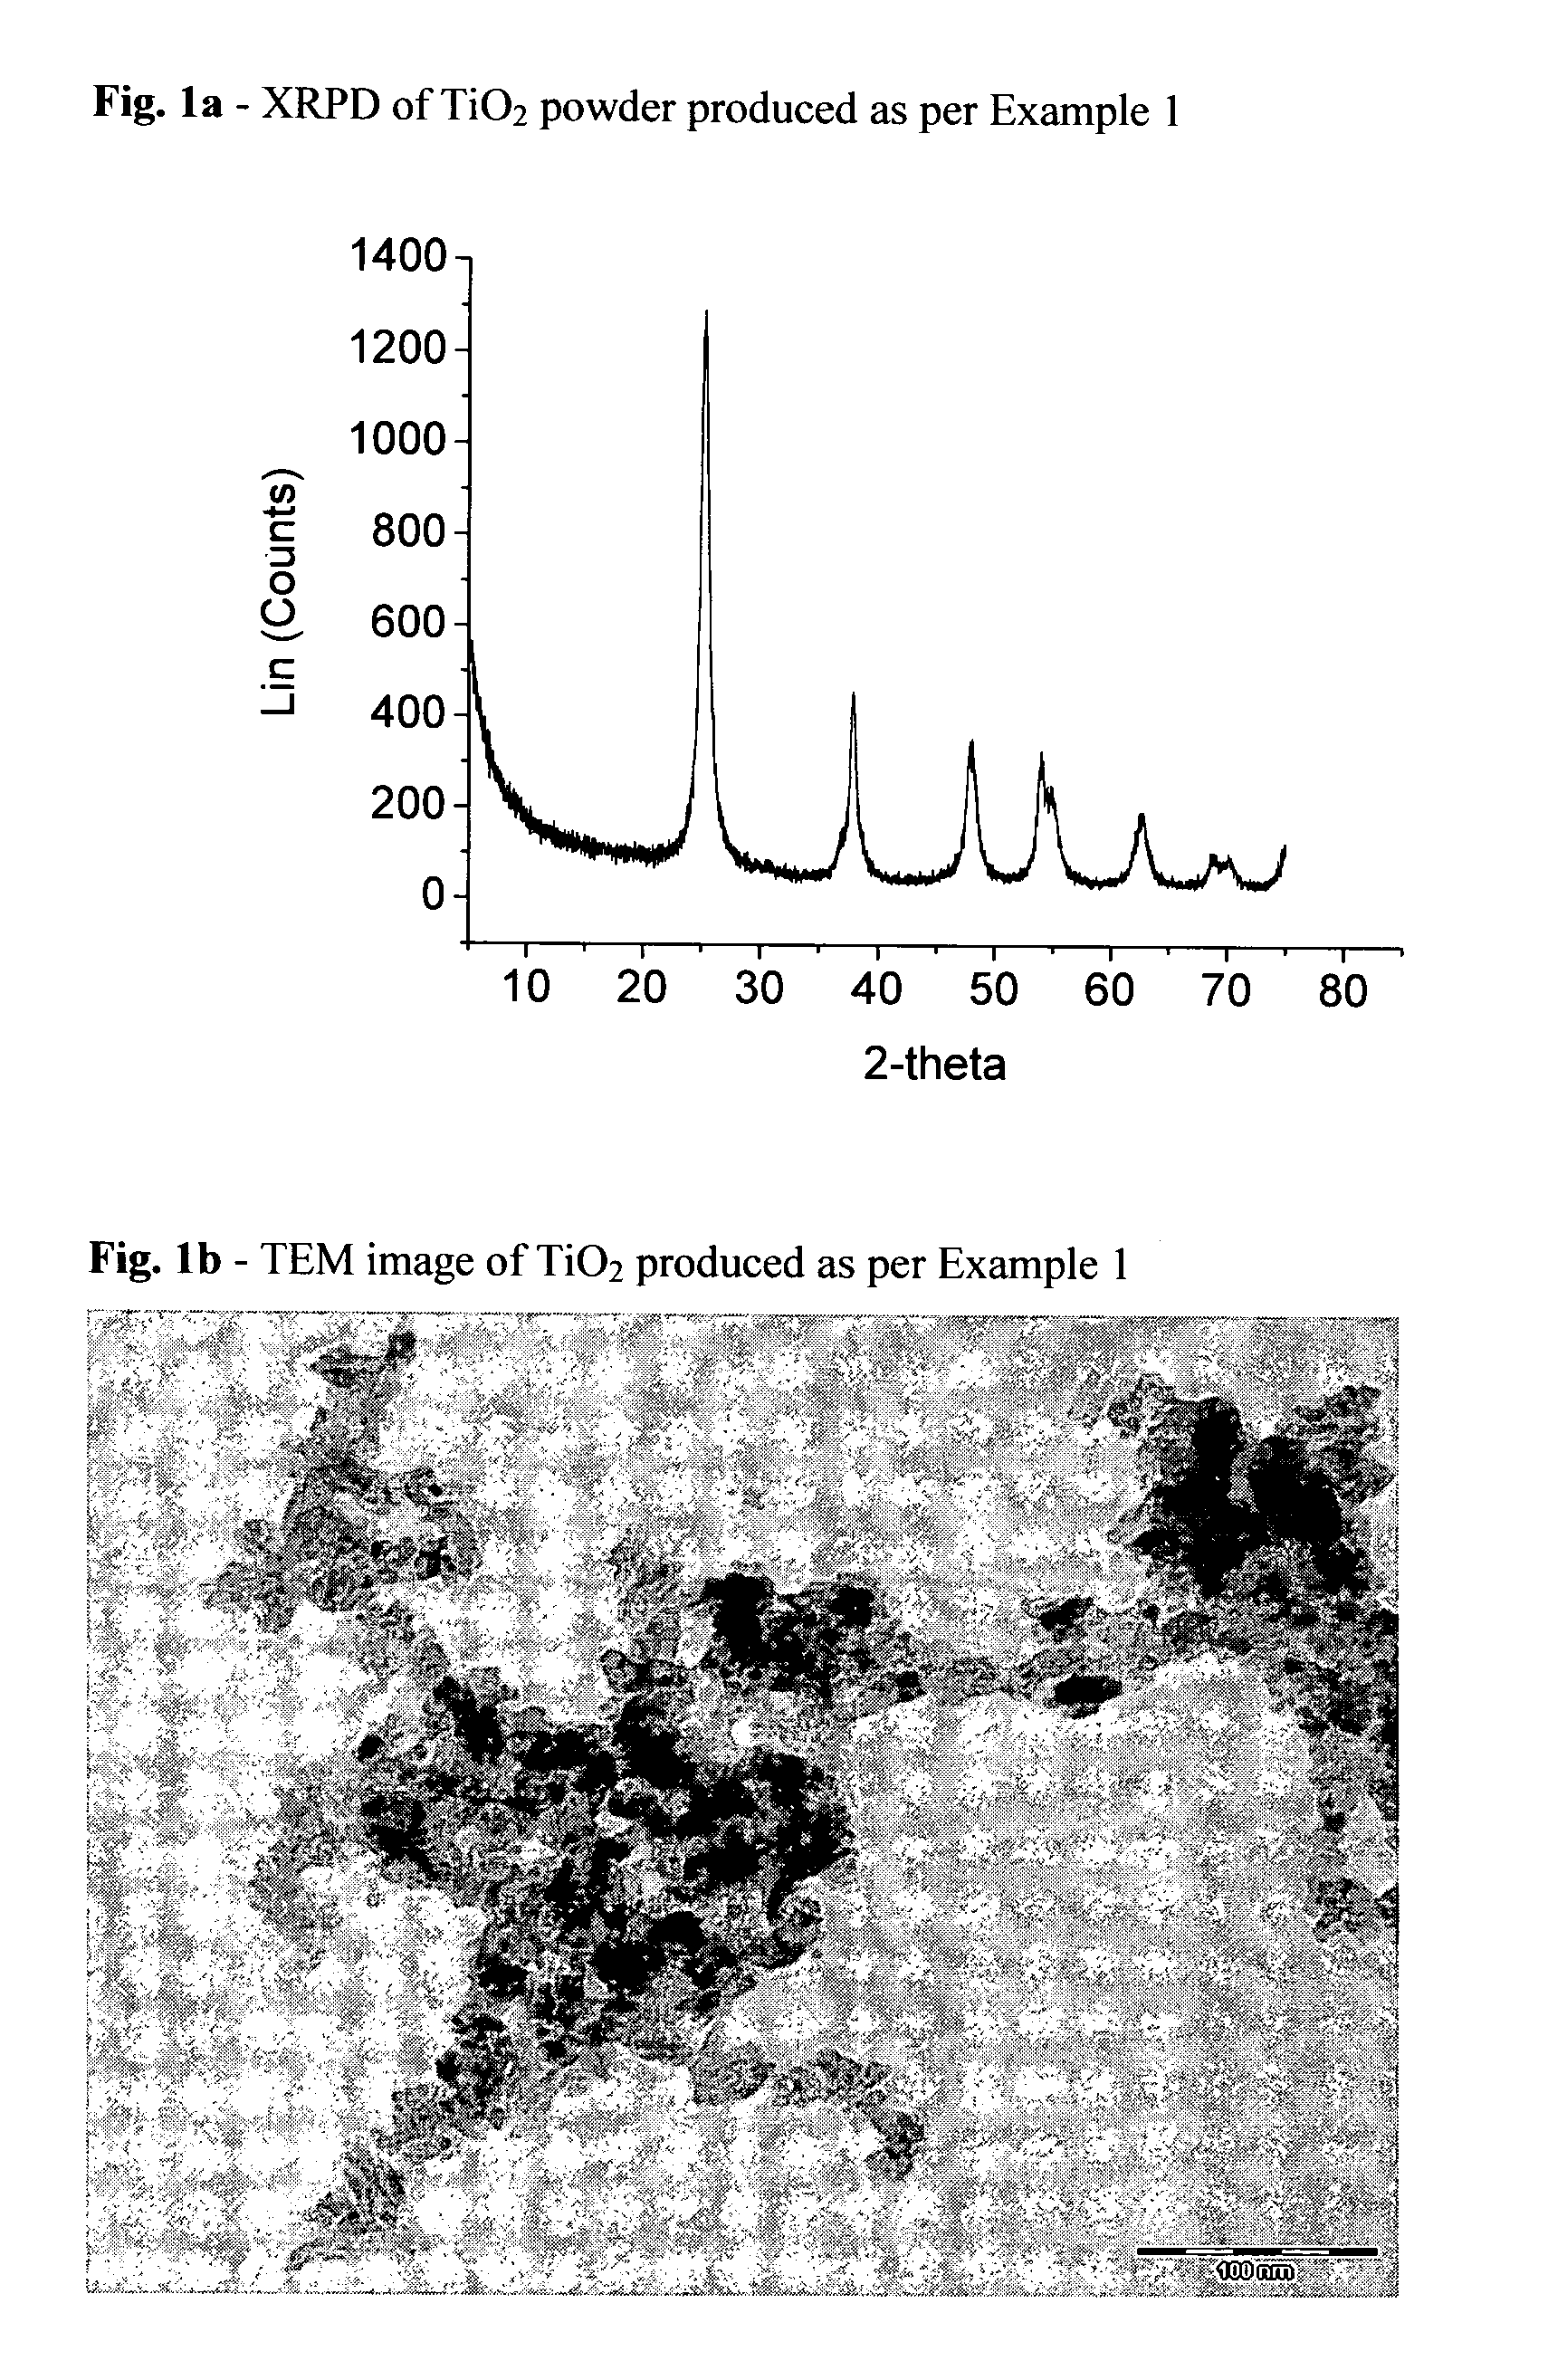 Process for the preparation of titanium dioxide with nanometric dimensions and controlled shape